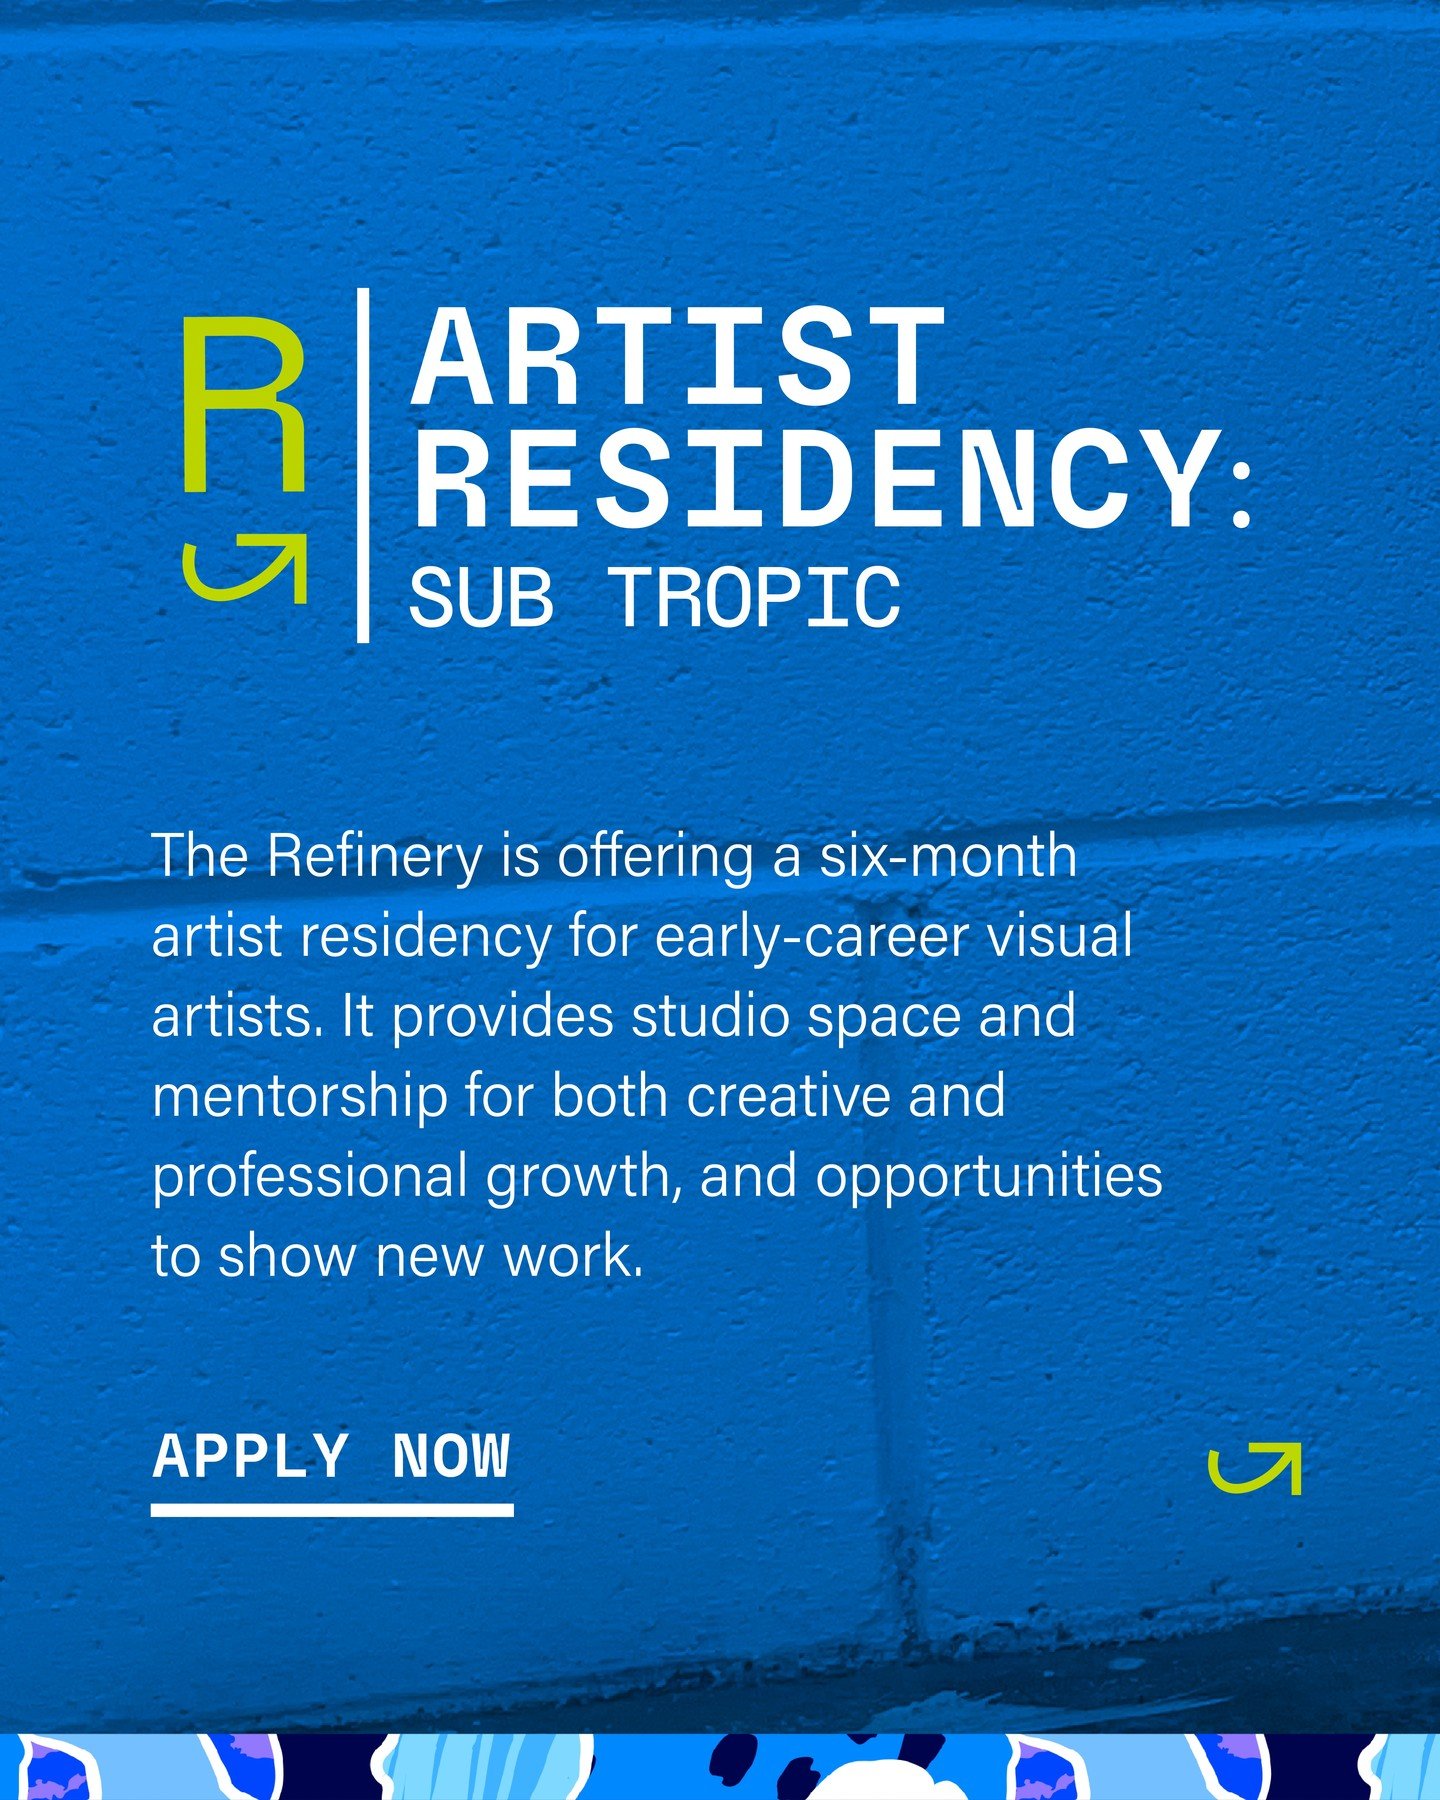 R|Artist Residency: Sub Tropic is now open for application 

Are you a visual artist wanting to experiment within your practice? This exciting six-month residency offers early-career visual artists a large studio space, mentoring and the opportunity 